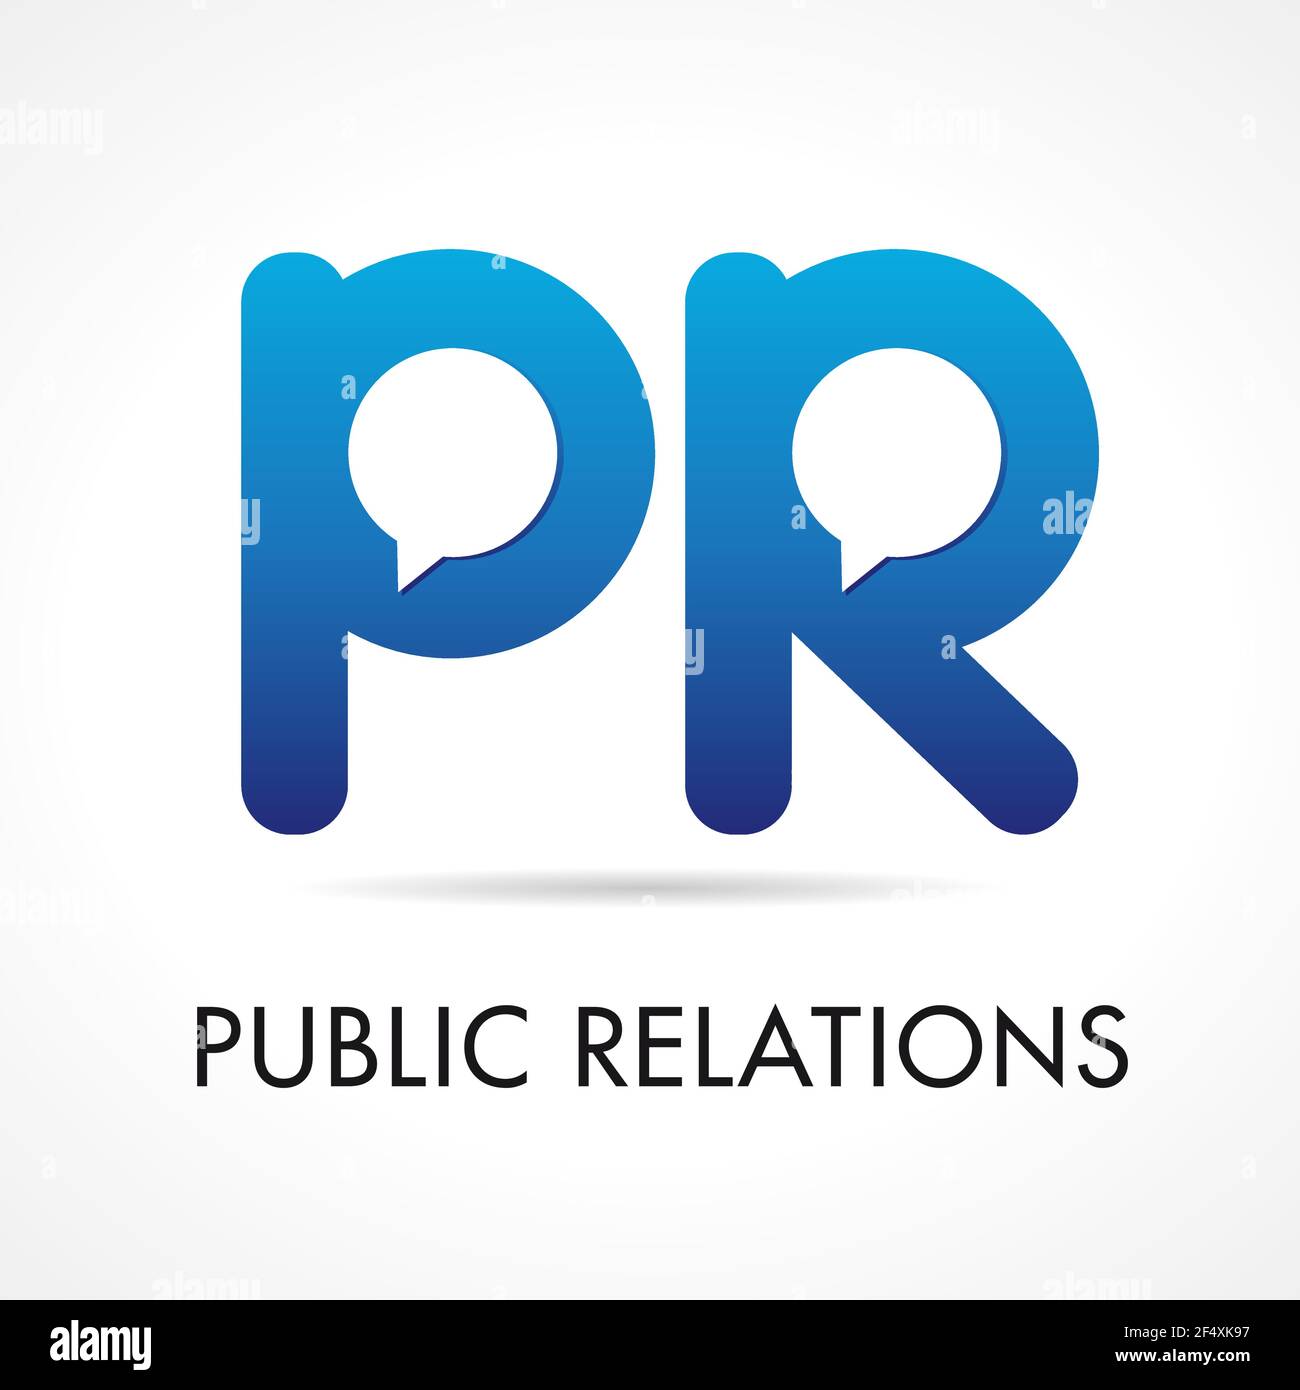 Public Relations PR company logotype. Initials pr blue colored volume branding icon with speaking or talking template elements. Advertising or promoti Stock Vector